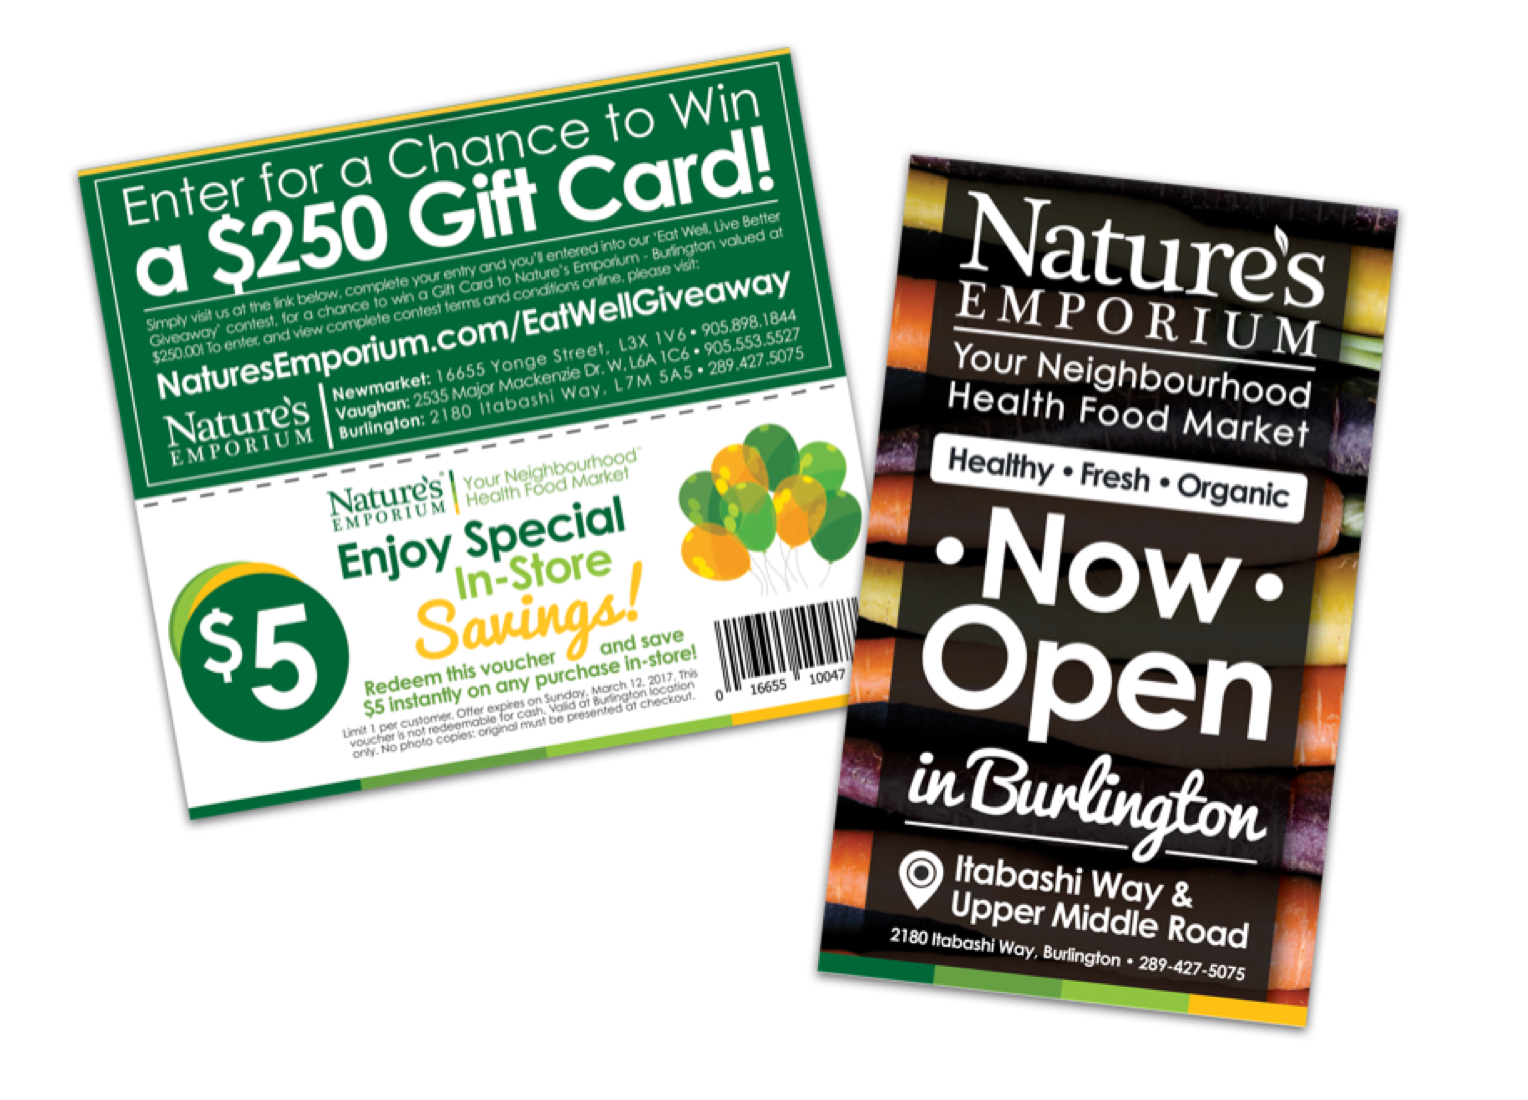 Examples of self-mailer coupon and postcard designs from Nature’s Emporium, a Burlington, Ontario health food market. 